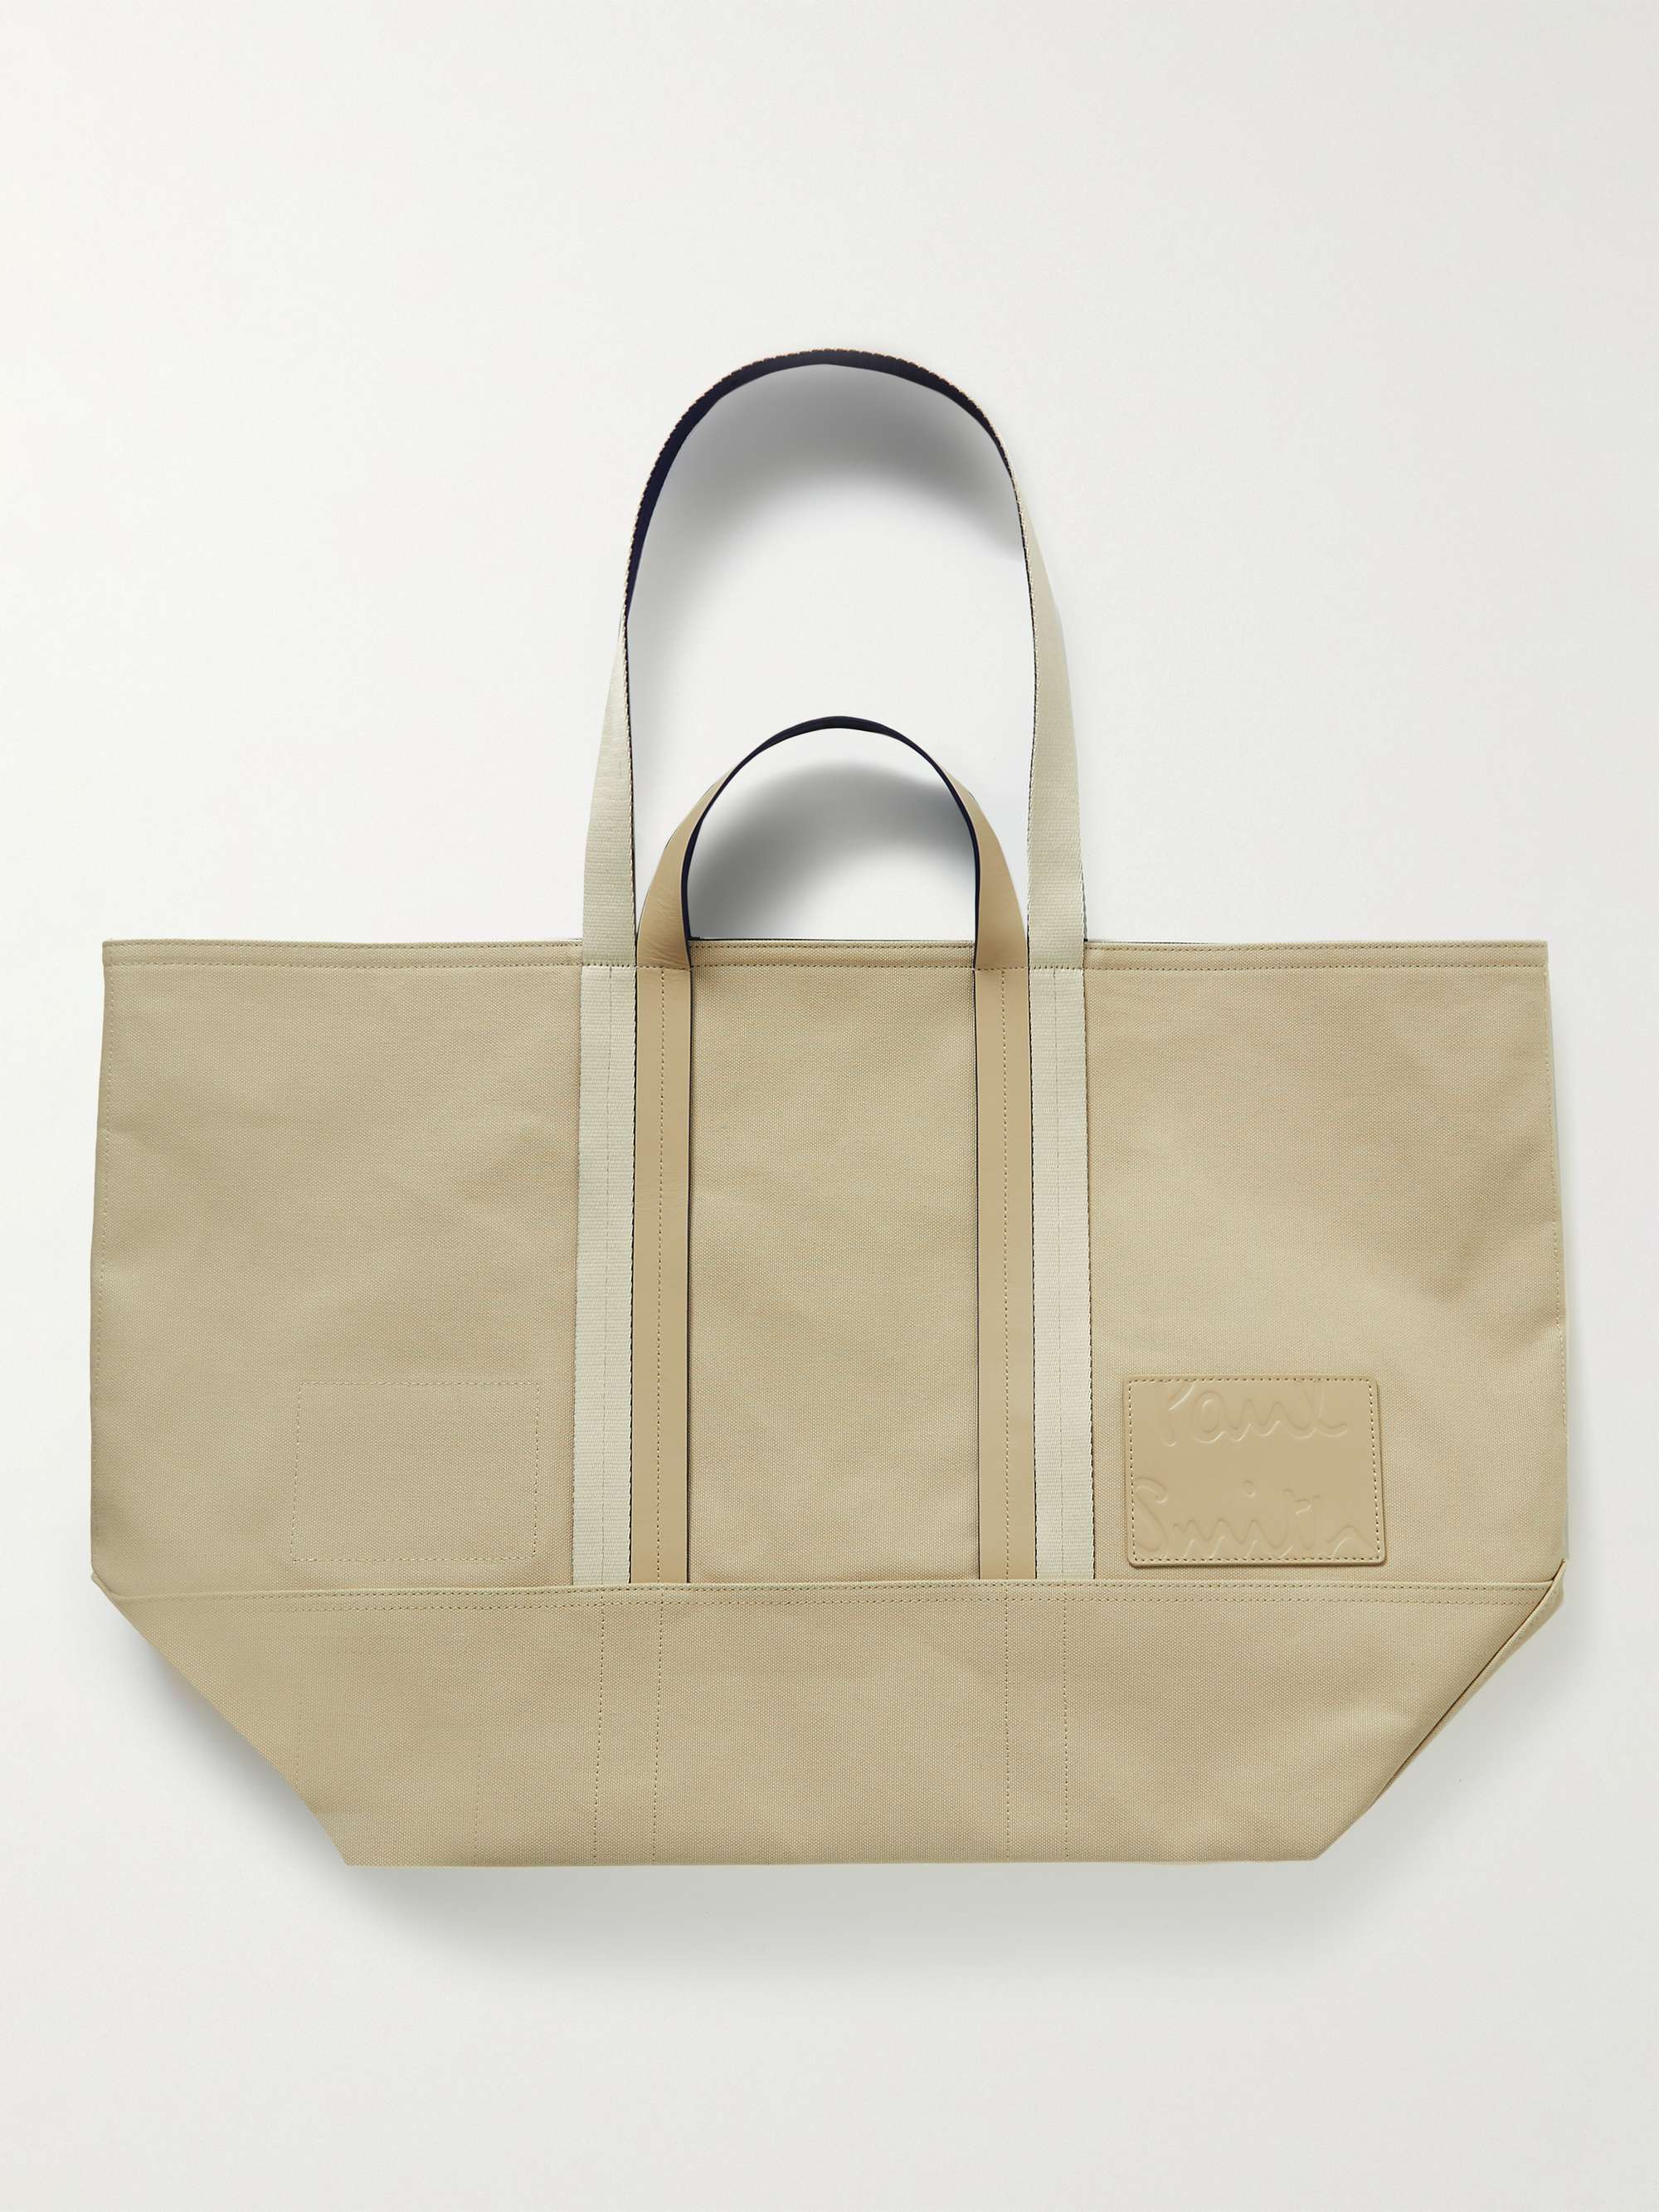 PAUL SMITH Reversible Leather-Trimmed Cotton-Canvas Tote Bag | MR PORTER